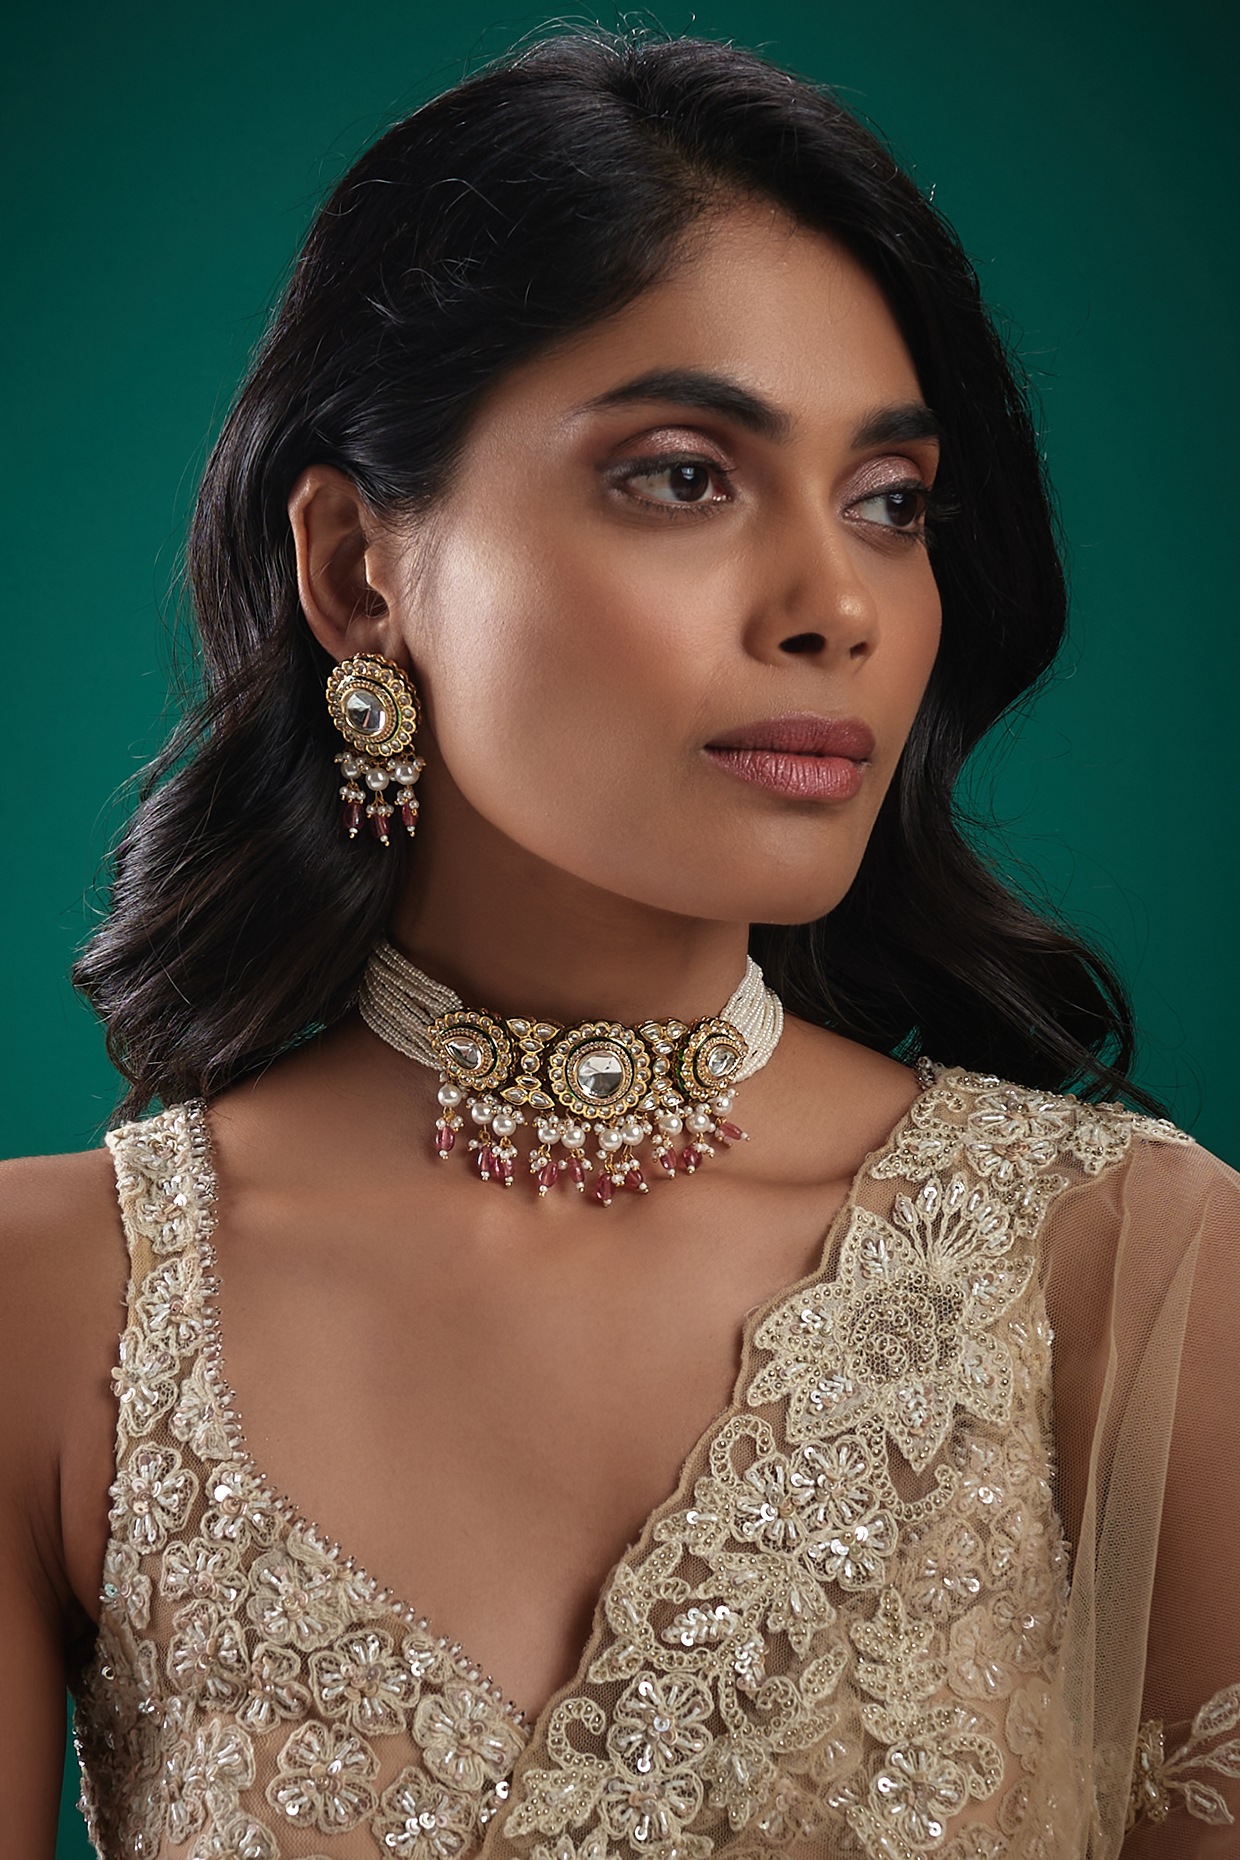 WhatToWear: Should I Wear A Choker Necklace Or Layered Jewellery? -